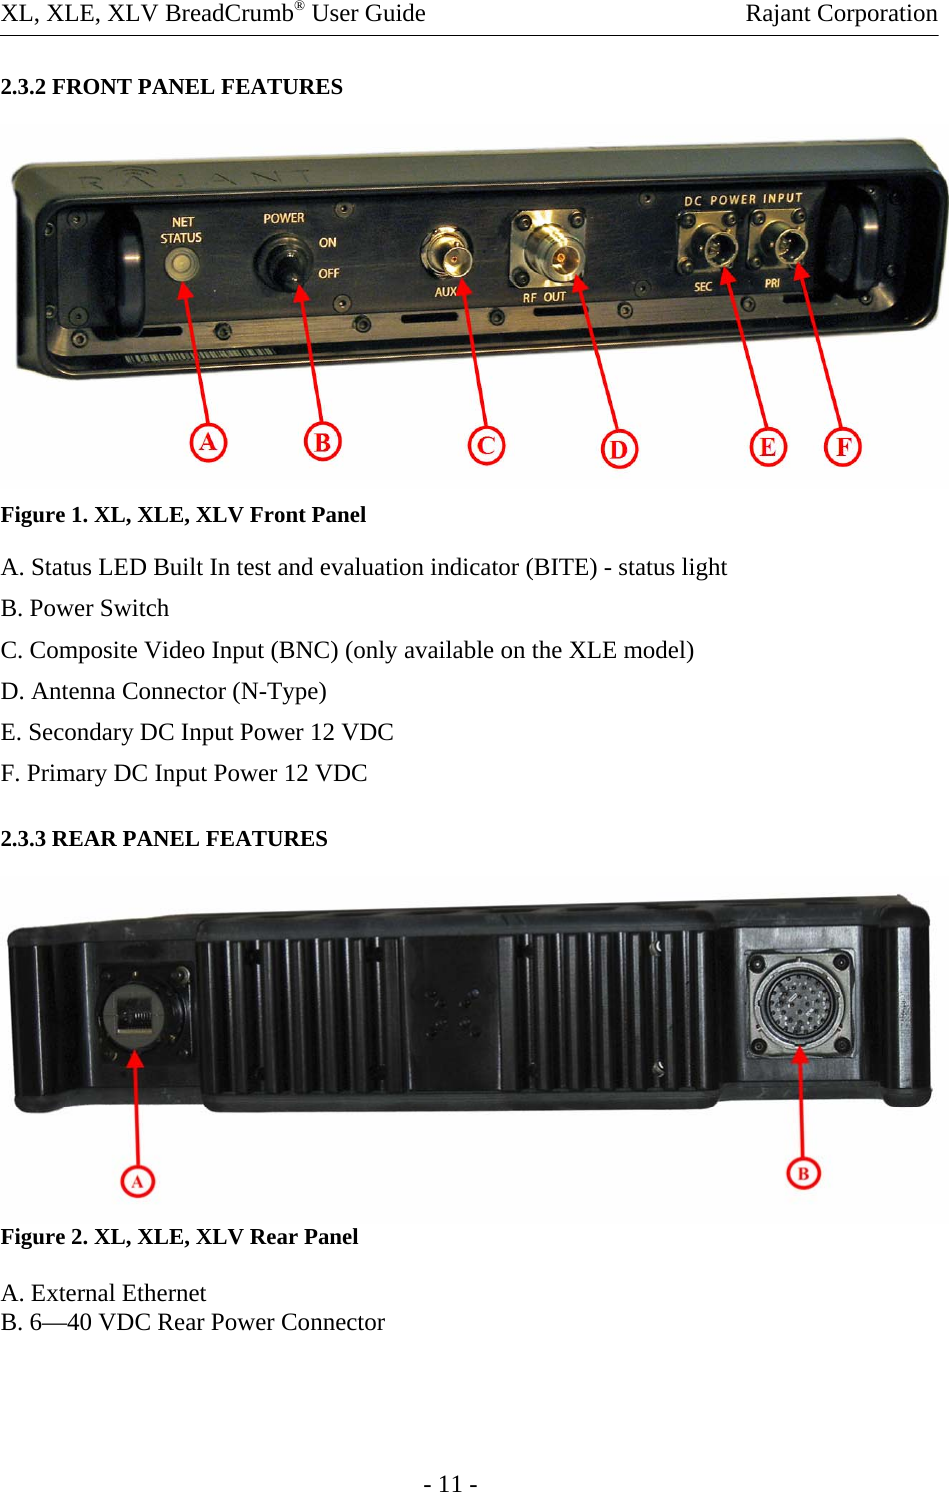 XL, XLE, XLV BreadCrumb® User Guide    Rajant Corporation 2.3.2 FRONT PANEL FEATURES  Figure 1. XL, XLE, XLV Front Panel A. Status LED Built In test and evaluation indicator (BITE) - status light B. Power Switch  C. Composite Video Input (BNC) (only available on the XLE model) D. Antenna Connector (N-Type) E. Secondary DC Input Power 12 VDC F. Primary DC Input Power 12 VDC 2.3.3 REAR PANEL FEATURES  Figure 2. XL, XLE, XLV Rear Panel  A. External Ethernet B. 6—40 VDC Rear Power Connector       - 11 - 